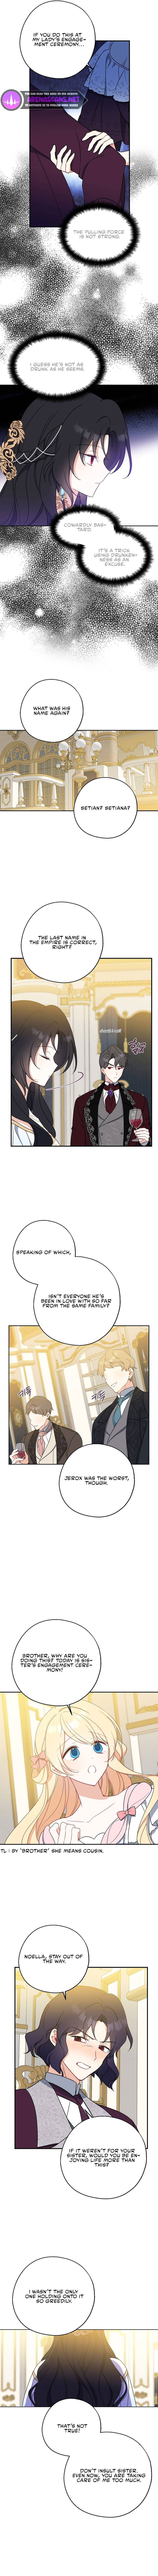 Say Ah, the Golden Spoon is Entering Chapter 46 page 5